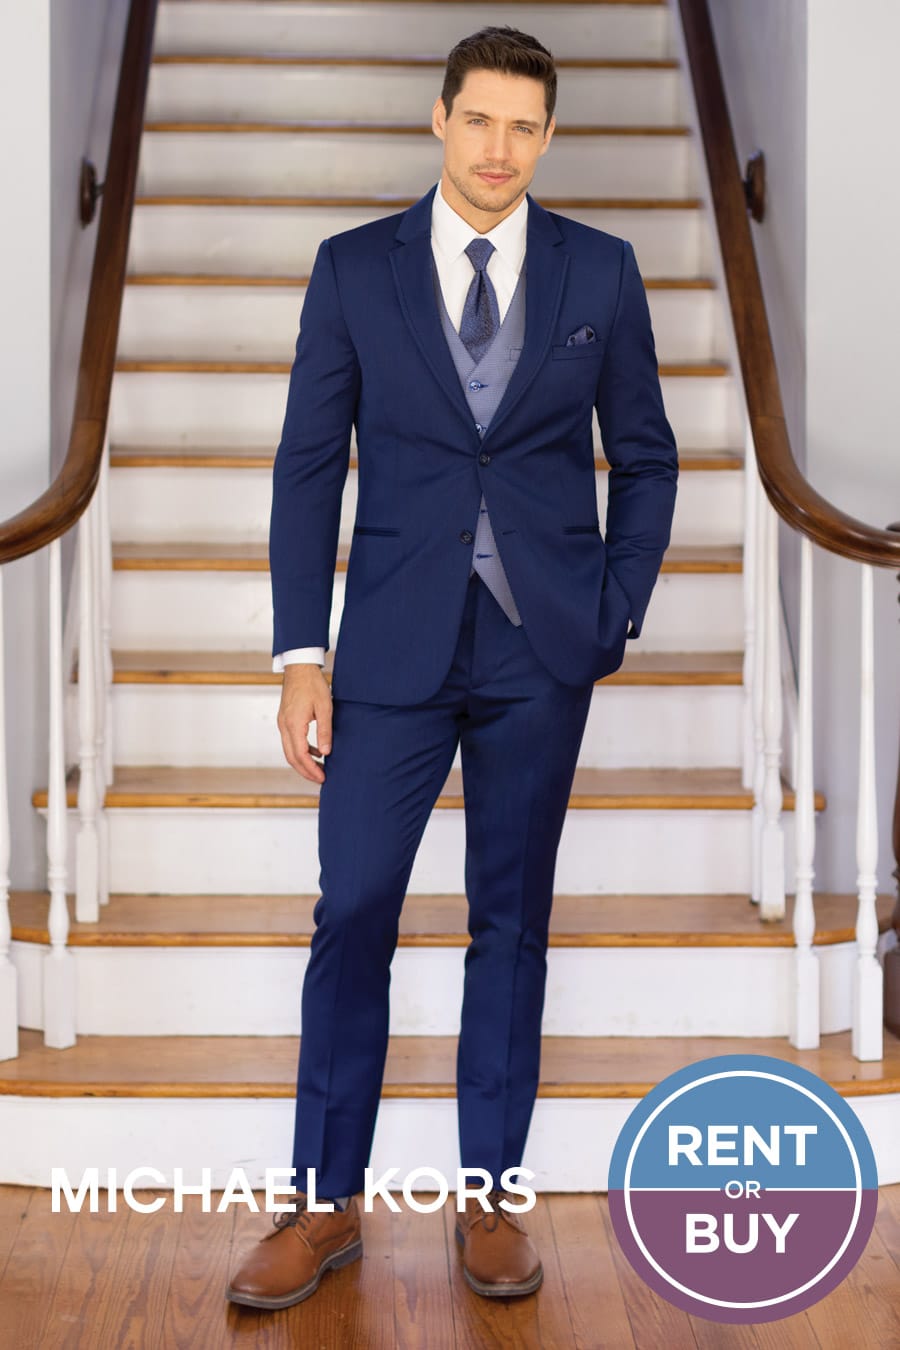 Michael Kors Blue Performance Wedding Suit Rent or Buy for your wedding